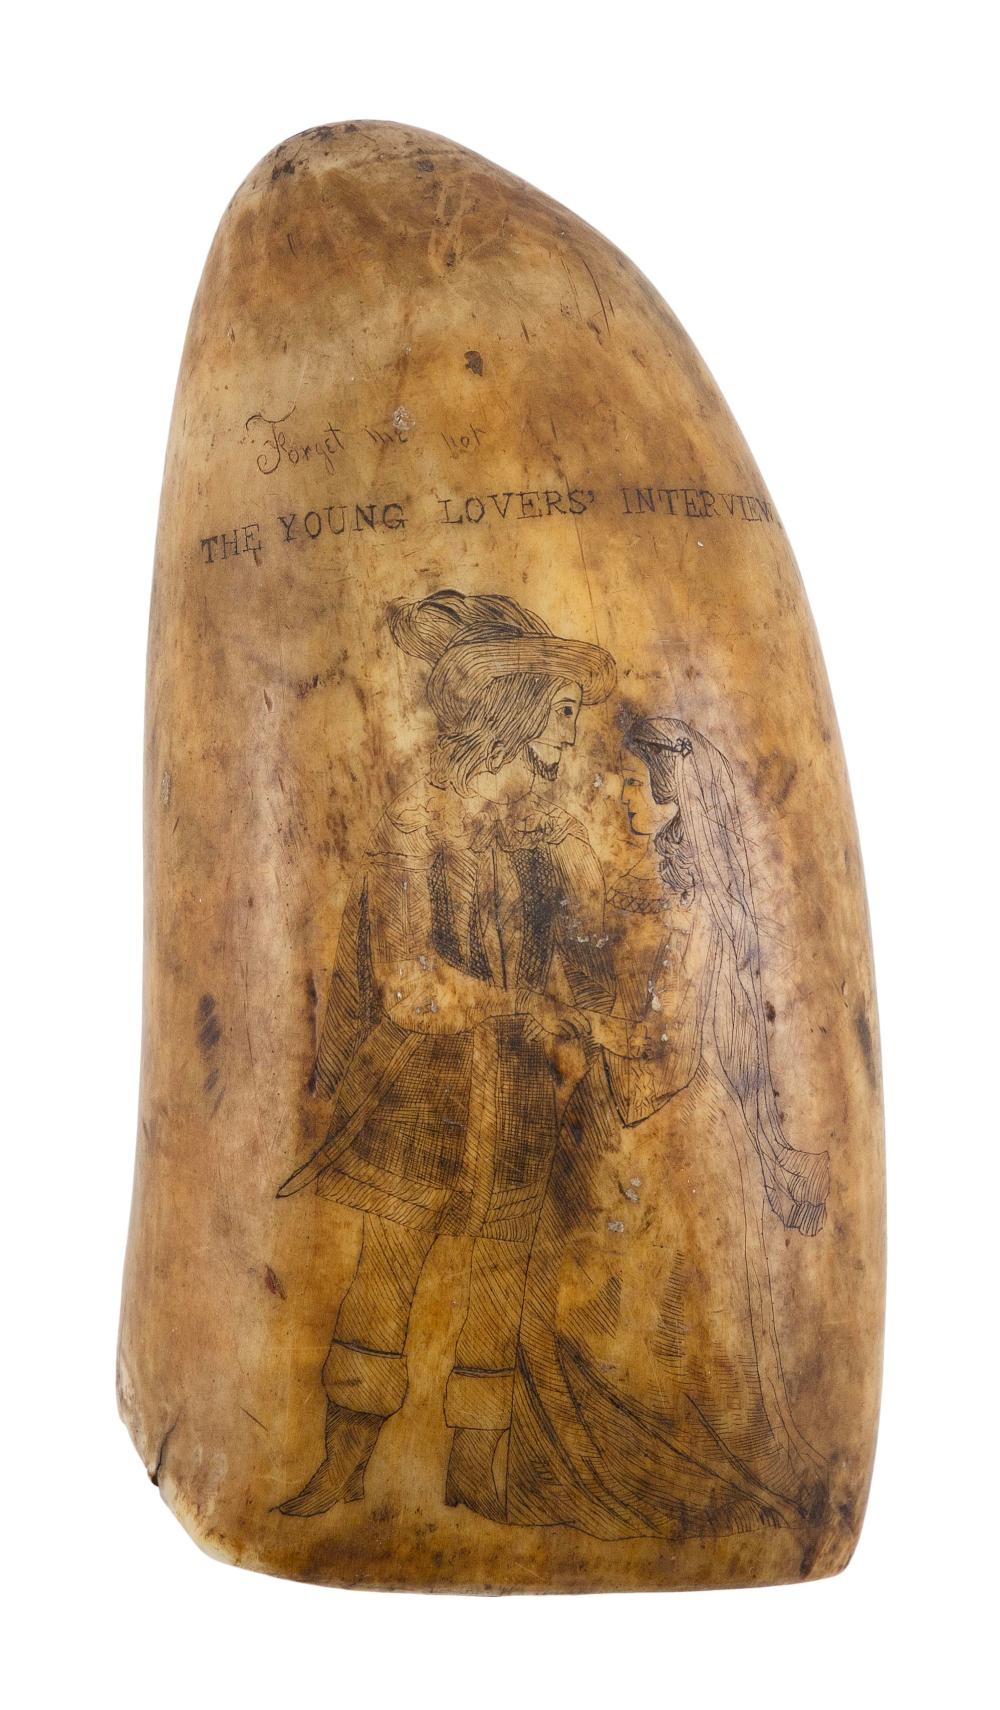 SCRIMSHAW WHALE'S TOOTH "THE YOUNG